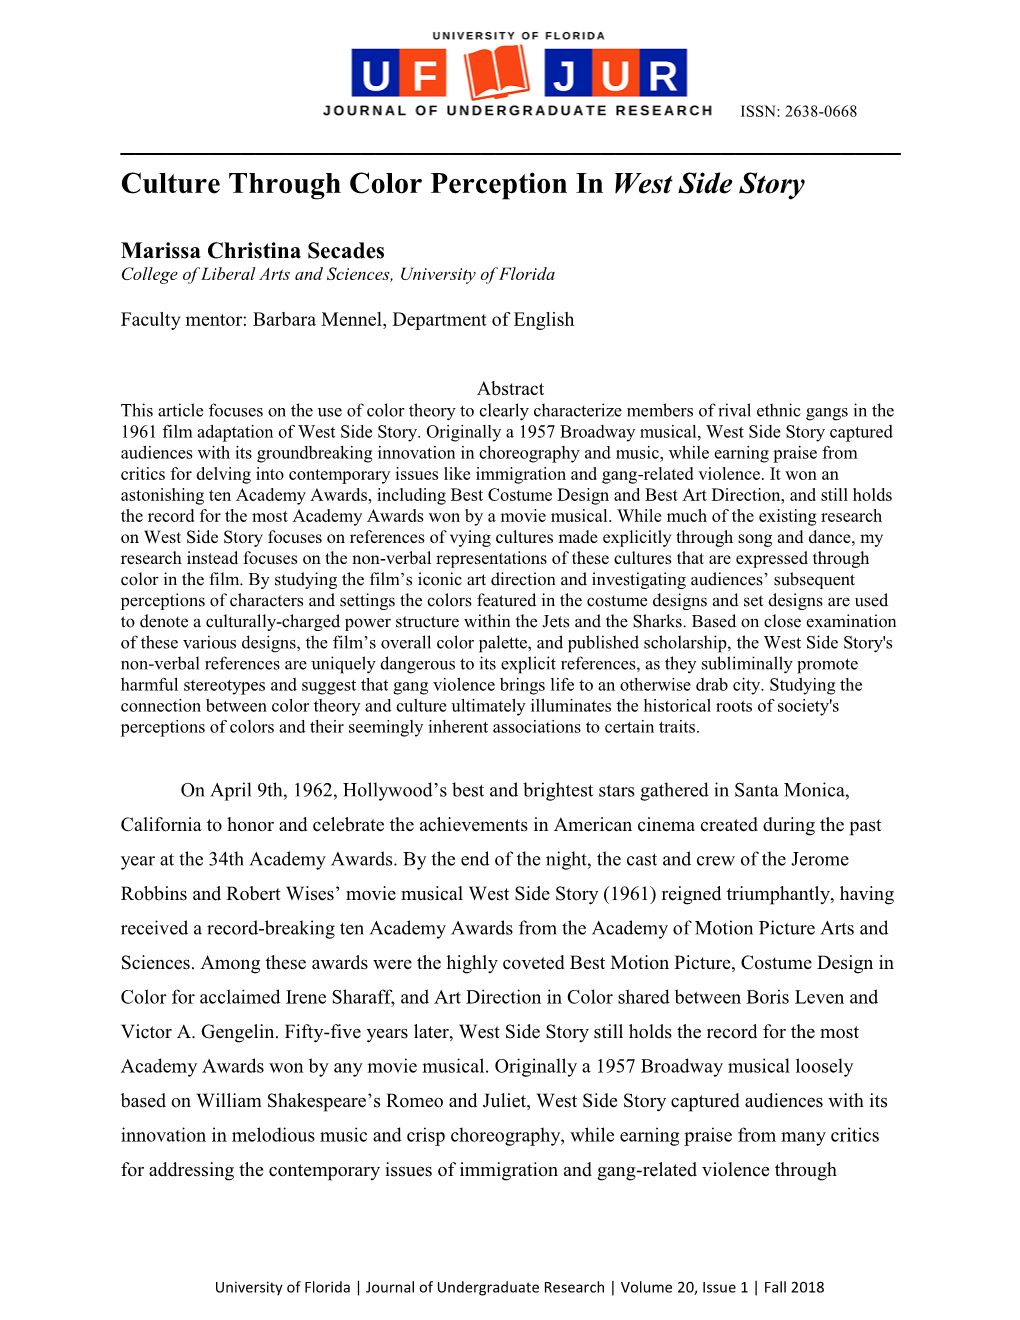 Culture Through Color Perception in West Side Story